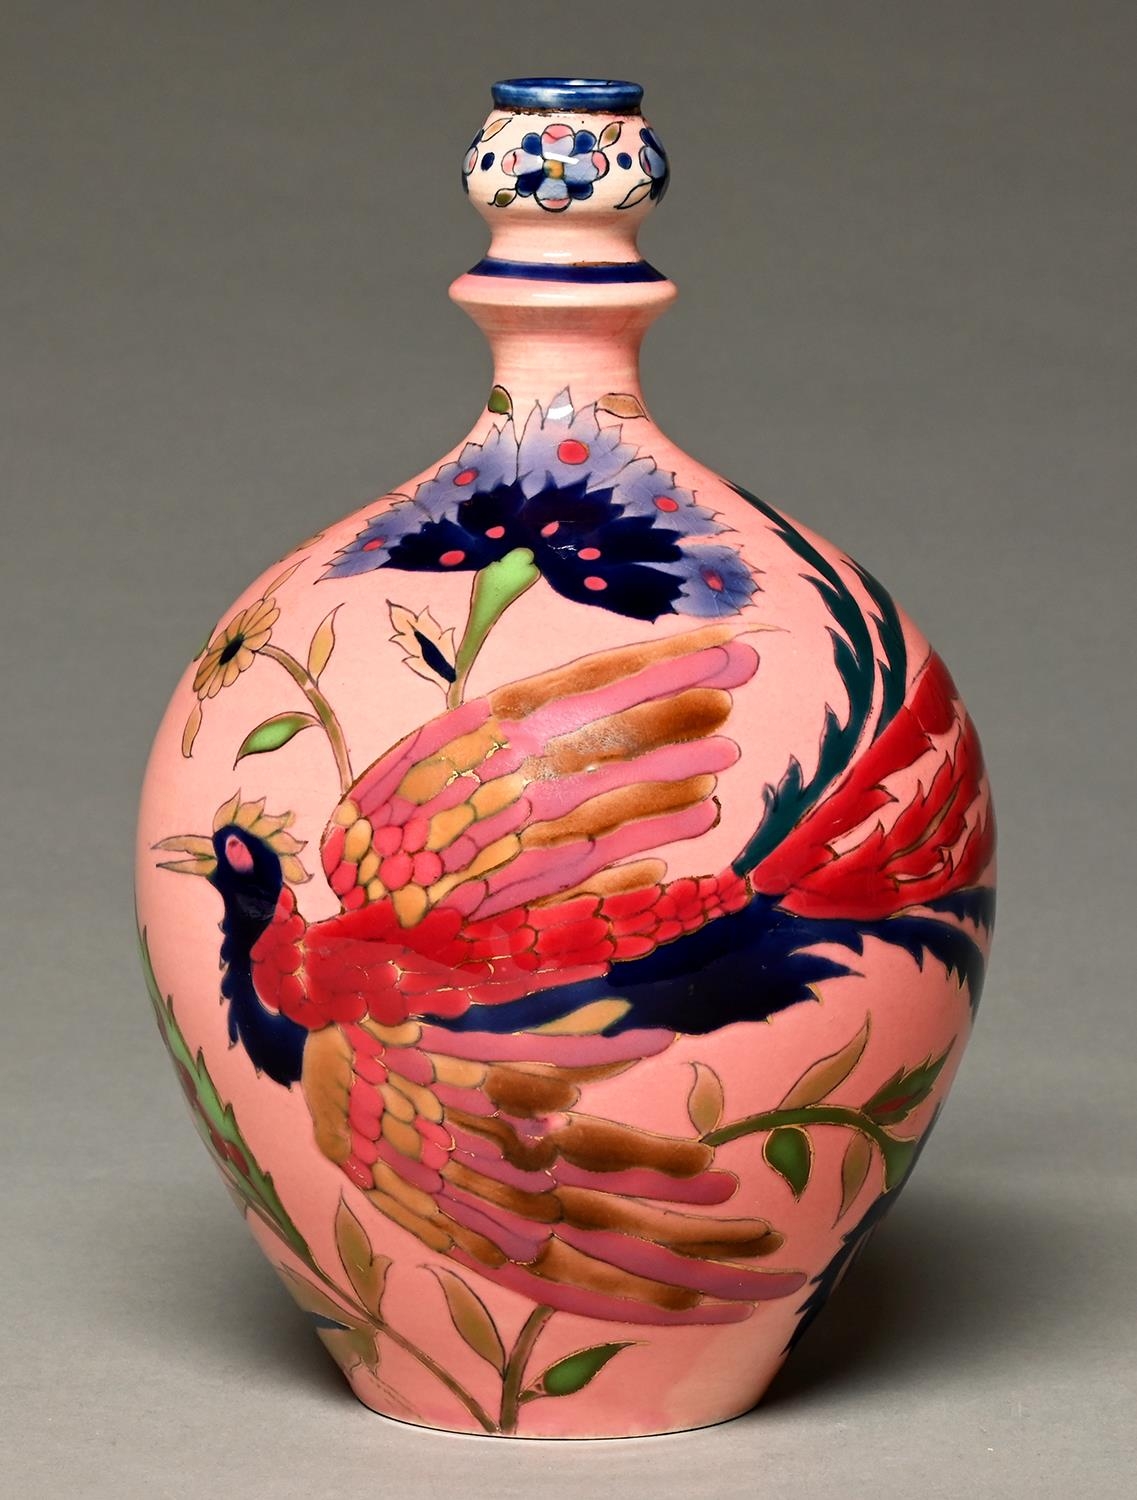 A Zsolnay ewer, c1880, decorated in the Magyar-Turkish style with a long tailed bird, tulips and